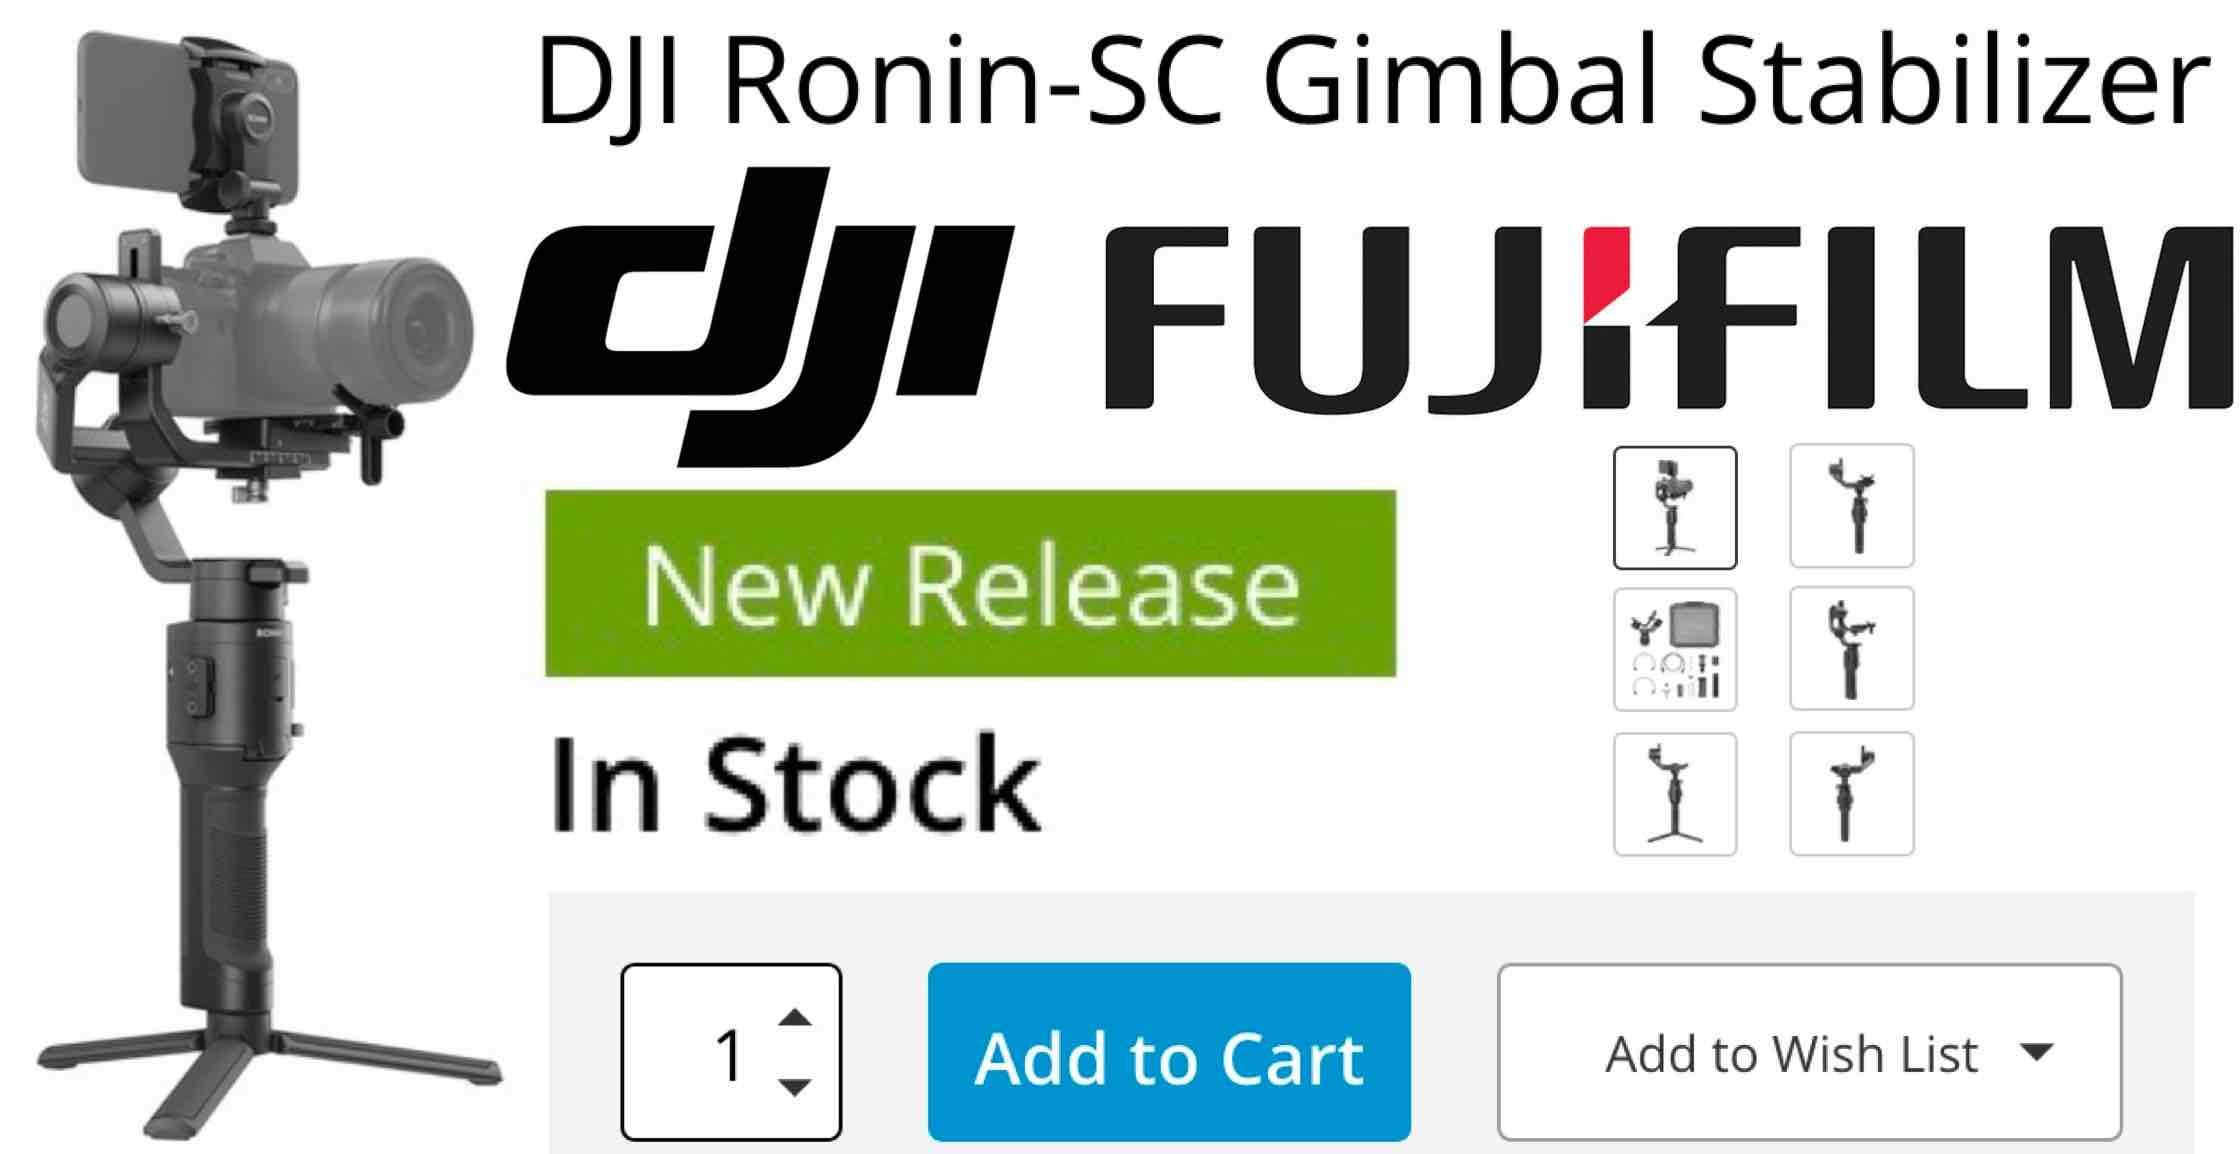 meesteres troosten Previs site DJI Ronin-SC Gimbal Launched with Fujifilm X-T3, X-T30, X-T2, X-T20 and  X-H1 Support - Fuji Rumors